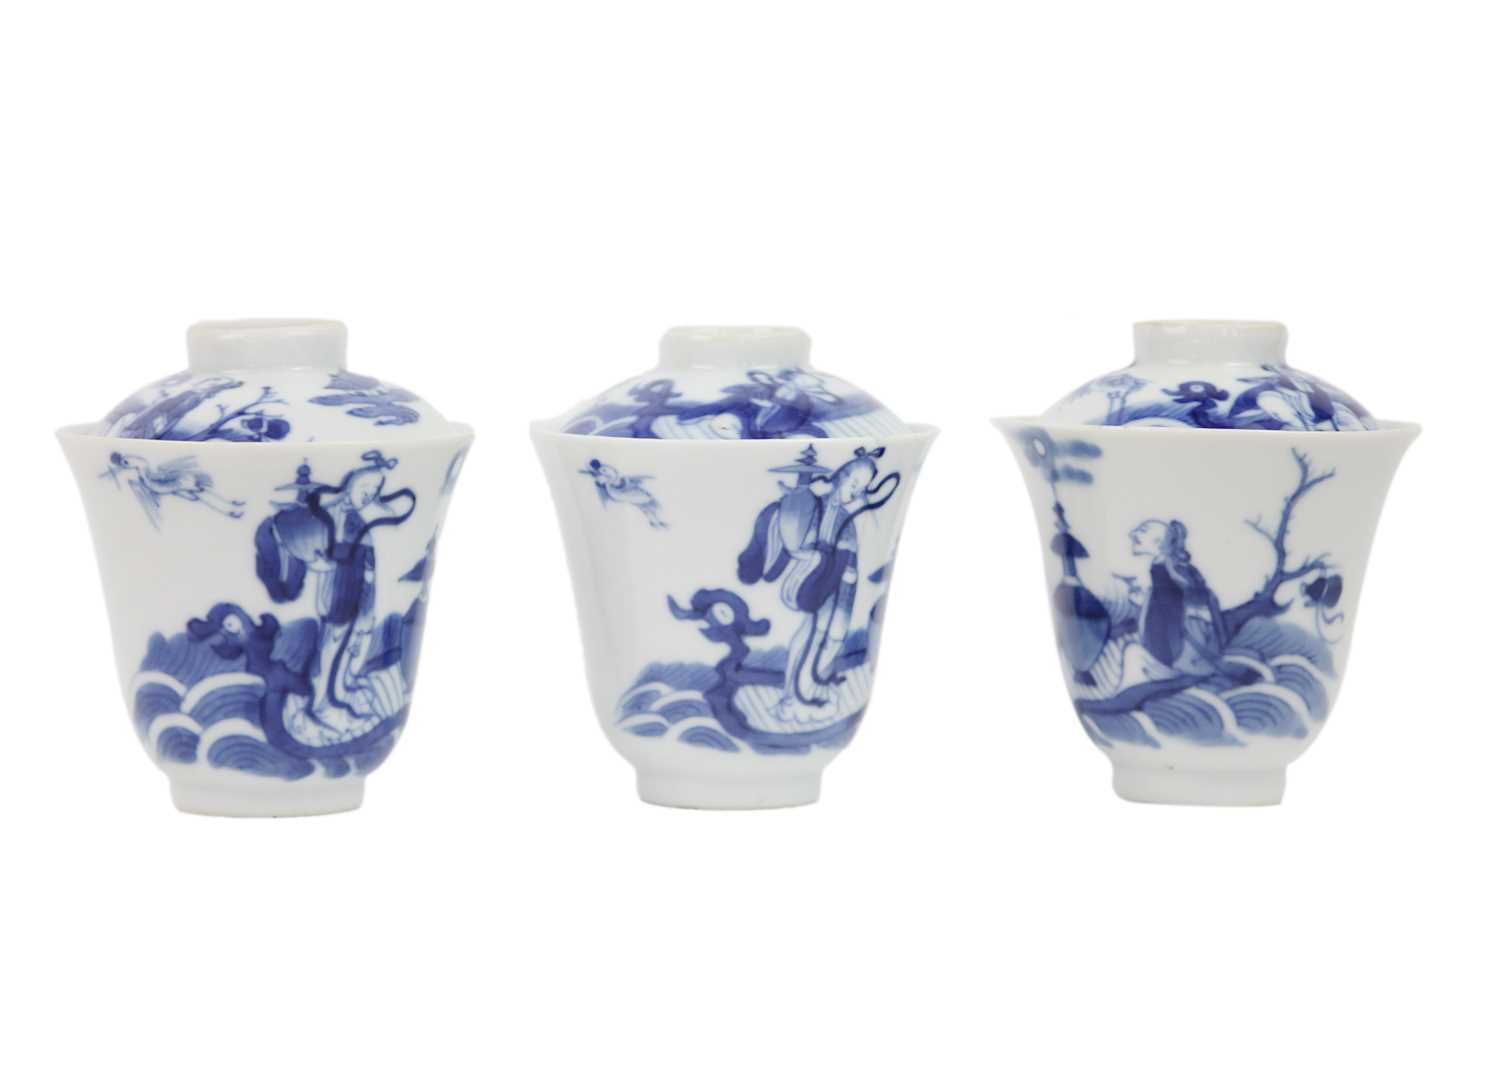 A set of Chinese blue and white porcelain cups, covers and stands, 18th century. - Image 2 of 41